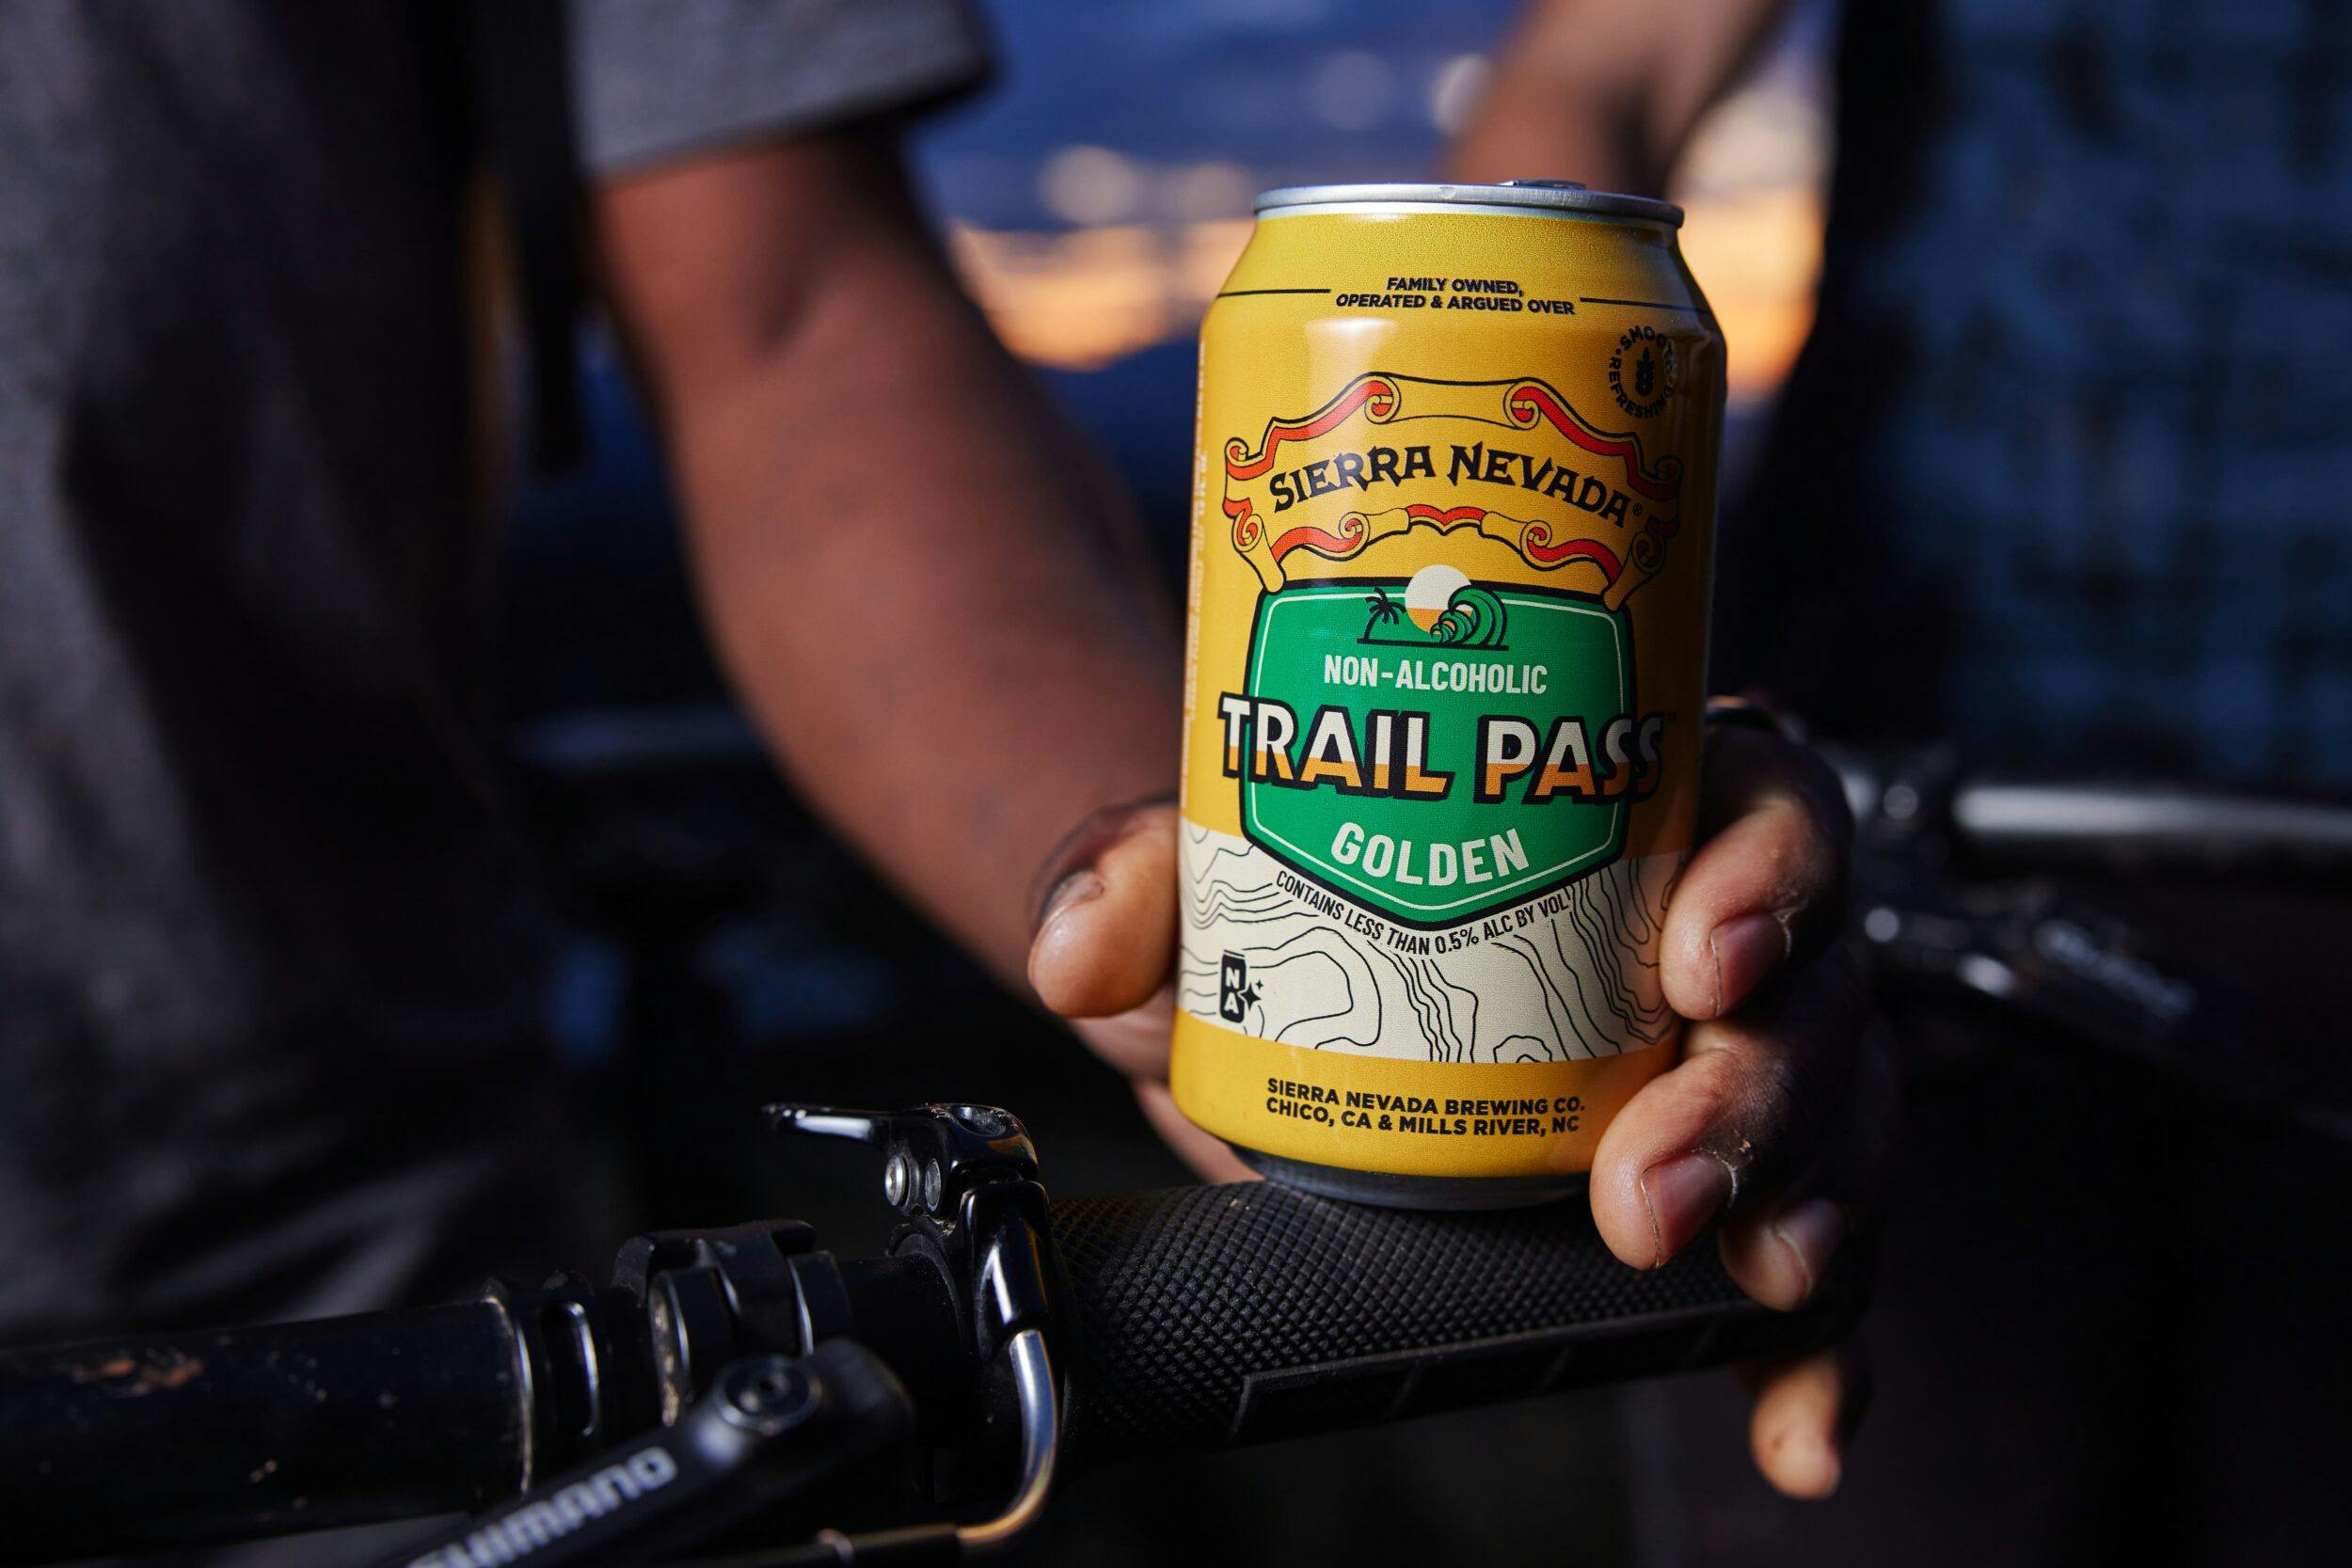 Trail Pass Golden can being held outside